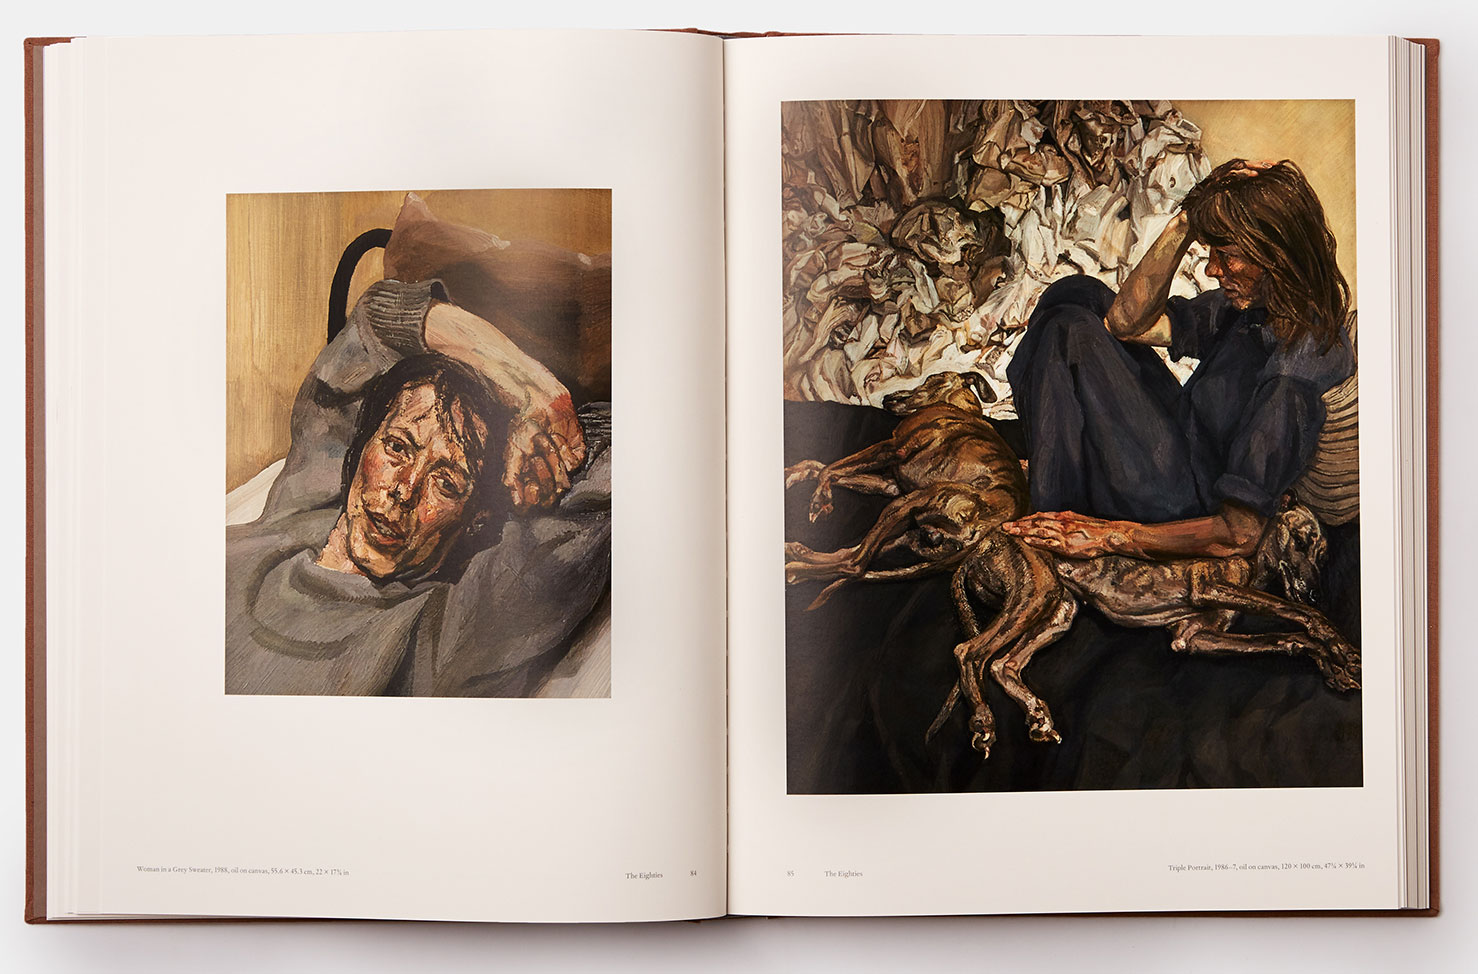 A spread from our new Lucian Freud publication featuring Woman in a Grey Sweater (1988) and Triple Portrait, (1986–7) both by Lucian Freud